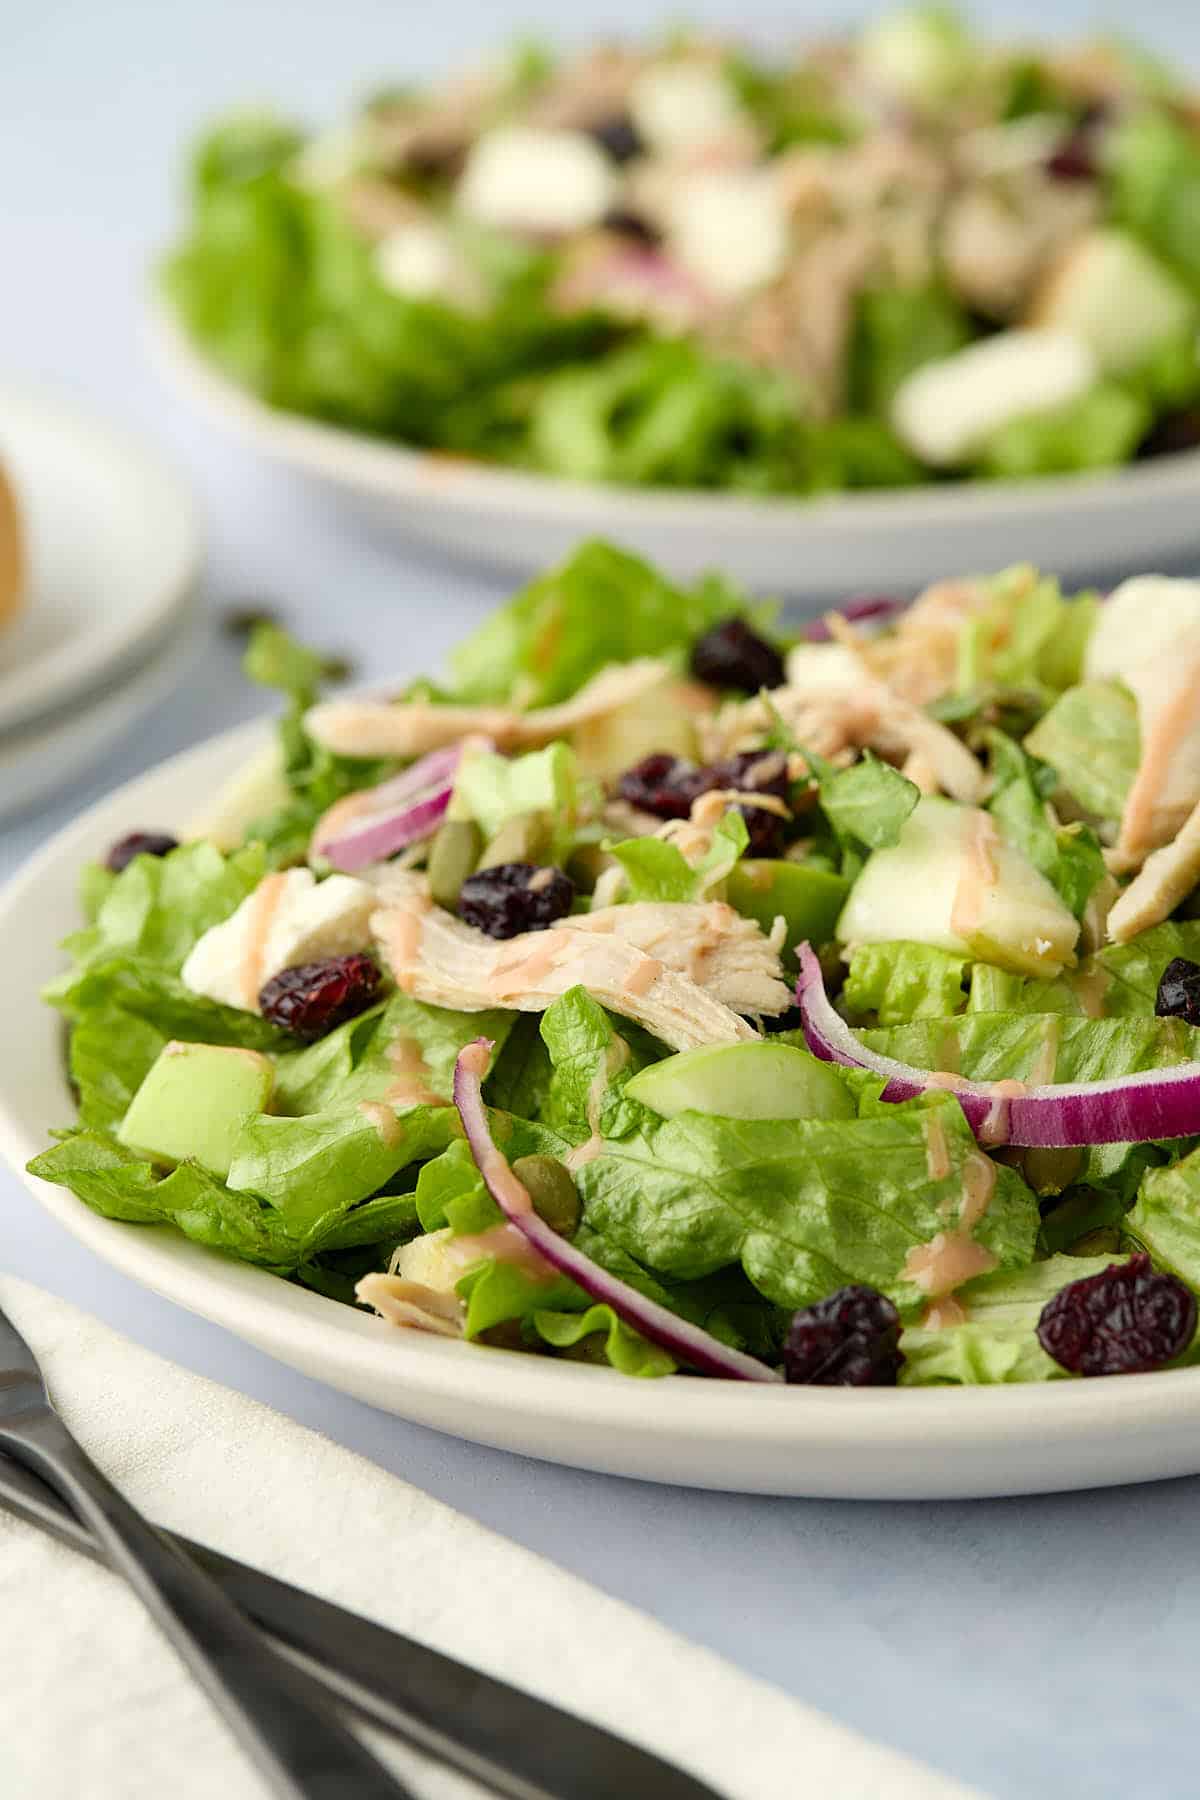 Turkey salad with cranberries and greens on a plate.